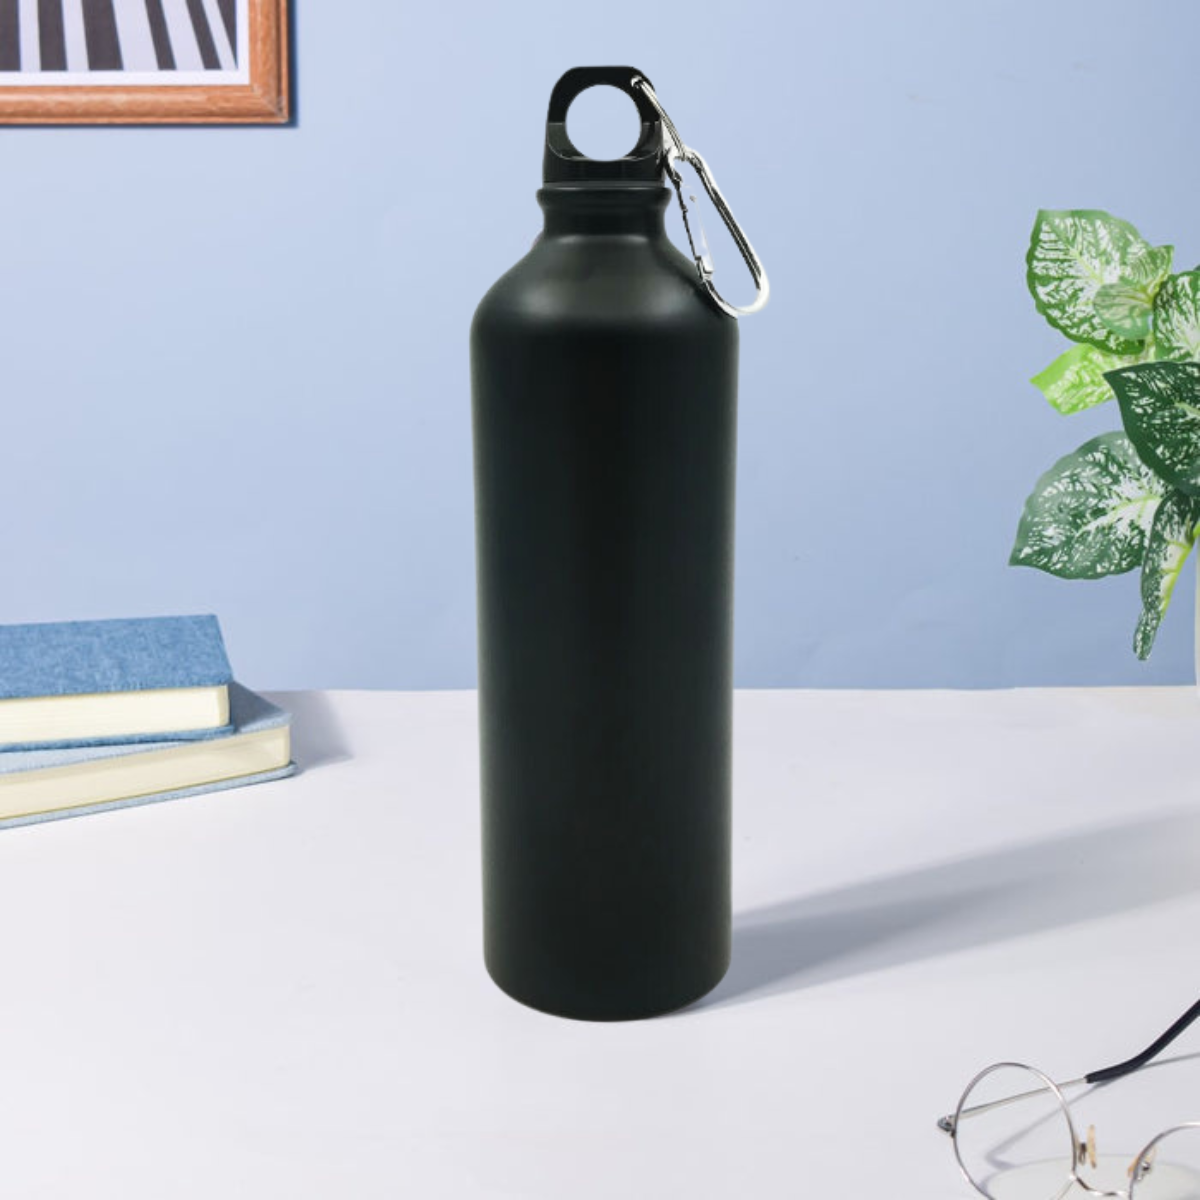 Personalized Matte Black Aluminium Water Bottle Multicolor UV Printed - 750ml - For Return Gift, Corporate Gifting, Office or Personal Use